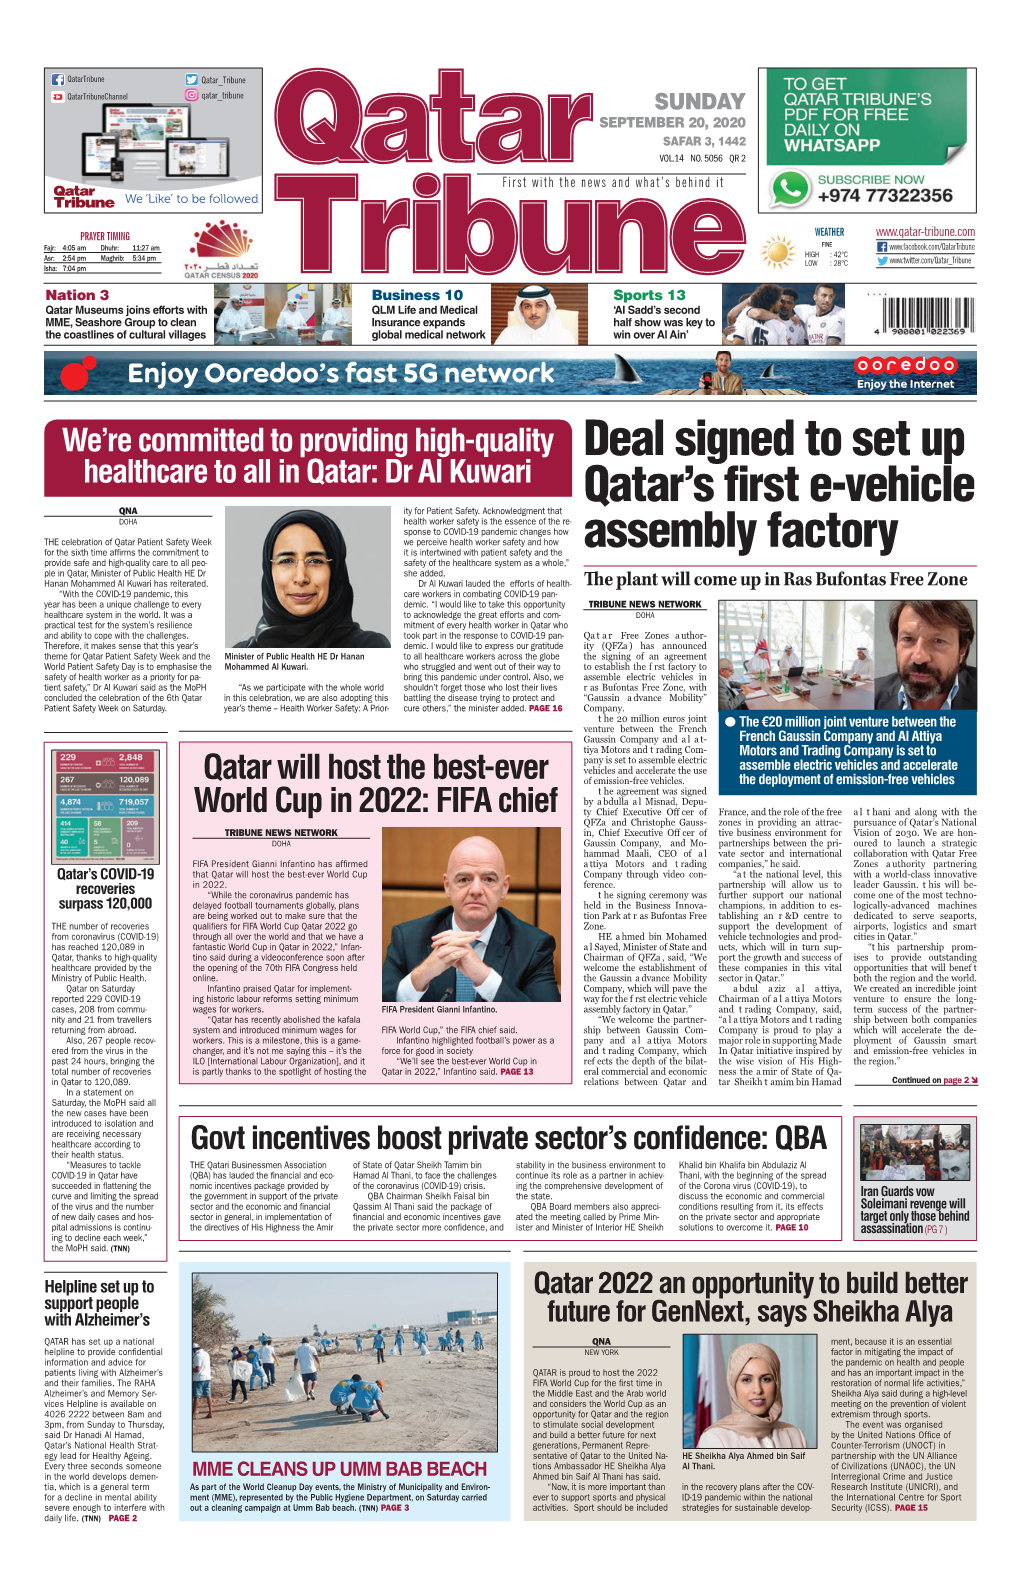 Deal Signed to Set up Qatar's First E-Vehicle Assembly Factory